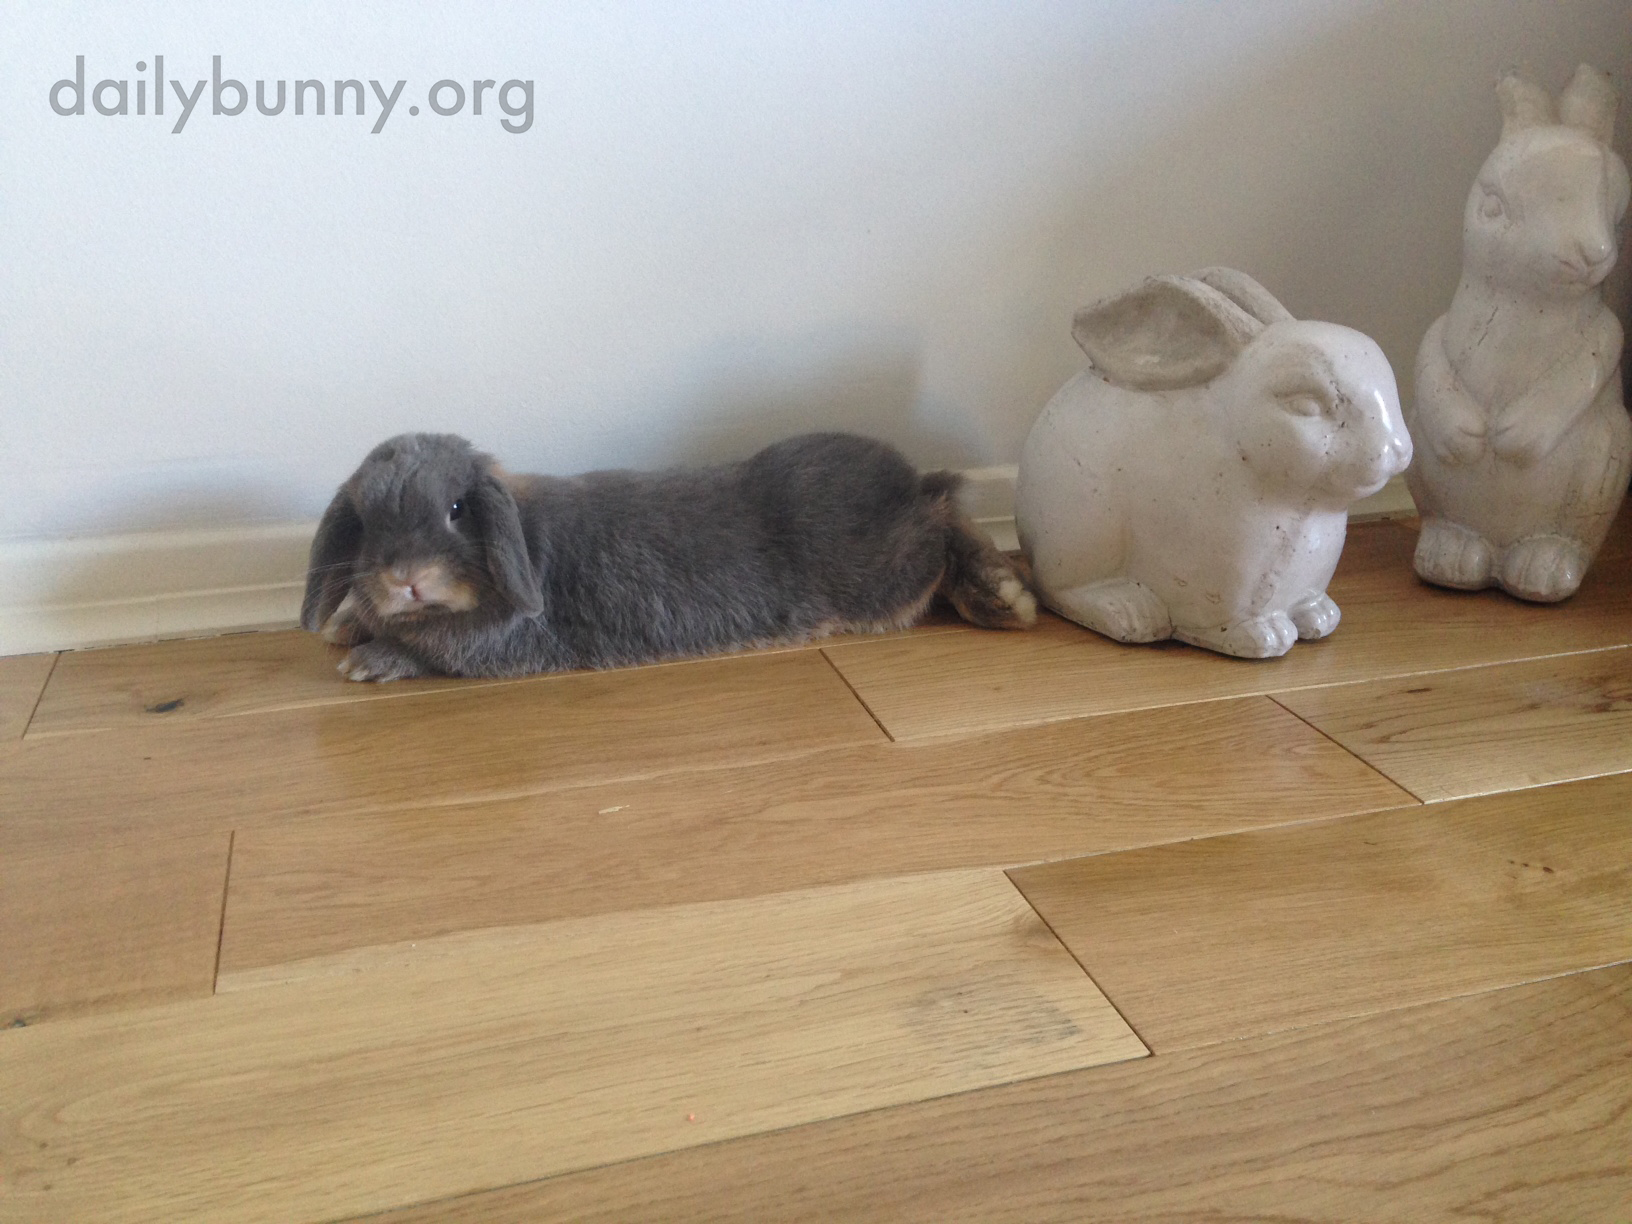 Can't a Grumpy Bunny Just Lie Down without a Human Ooh-ing and Aww-ing and Taking Pictures? 2